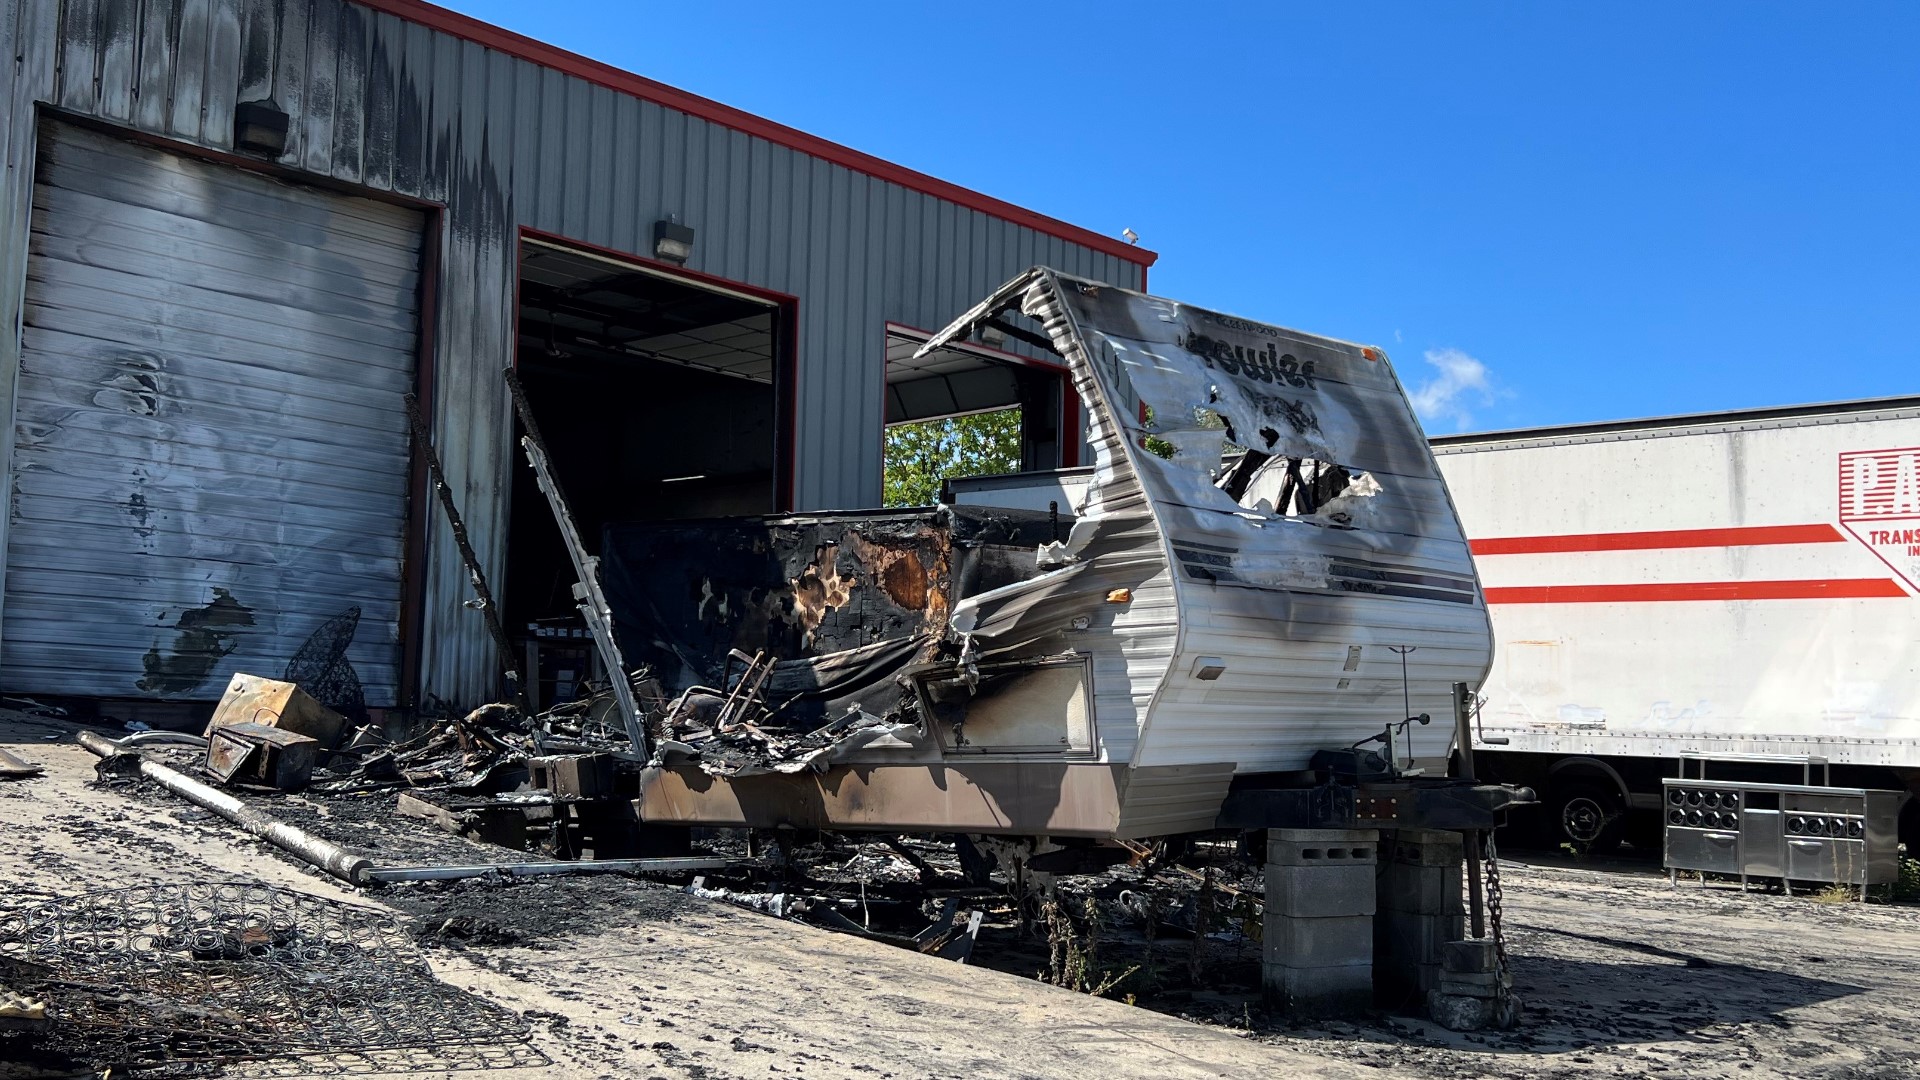 Investigators haven't determined if the fires are connected, but a Zoneton Fire spokesperson said they are of "suspicious" origin.